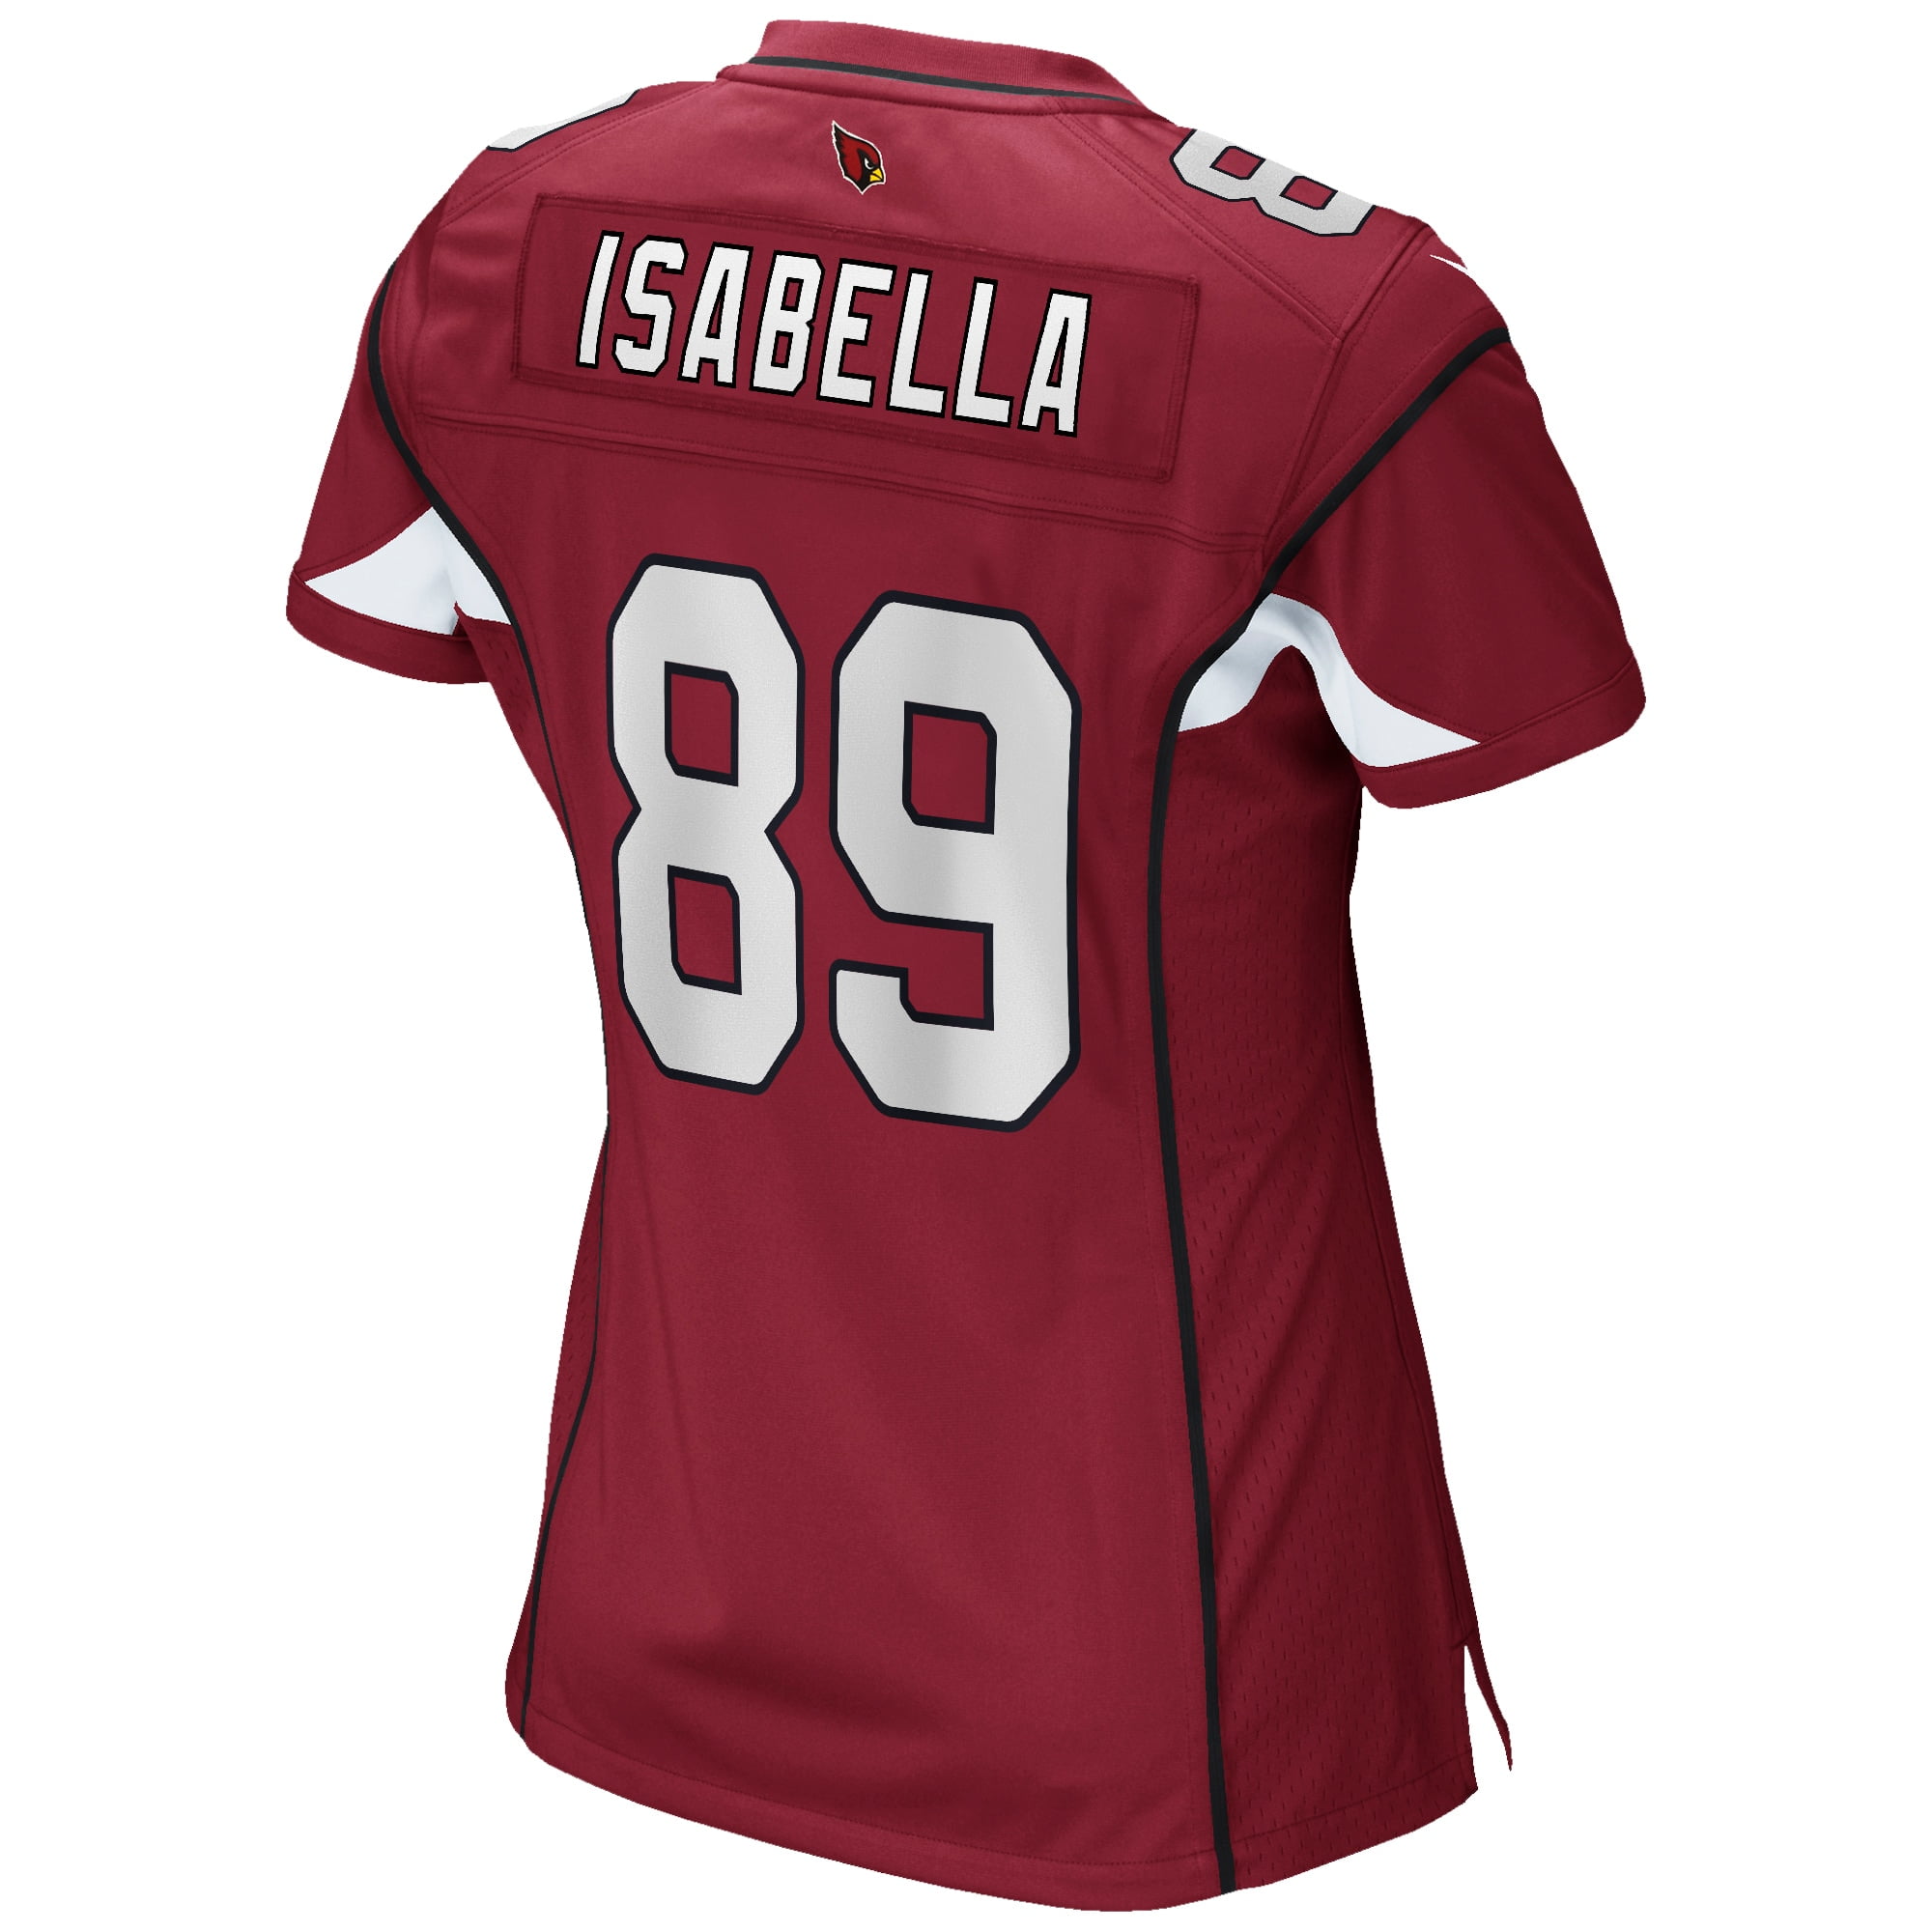 andy isabella jersey